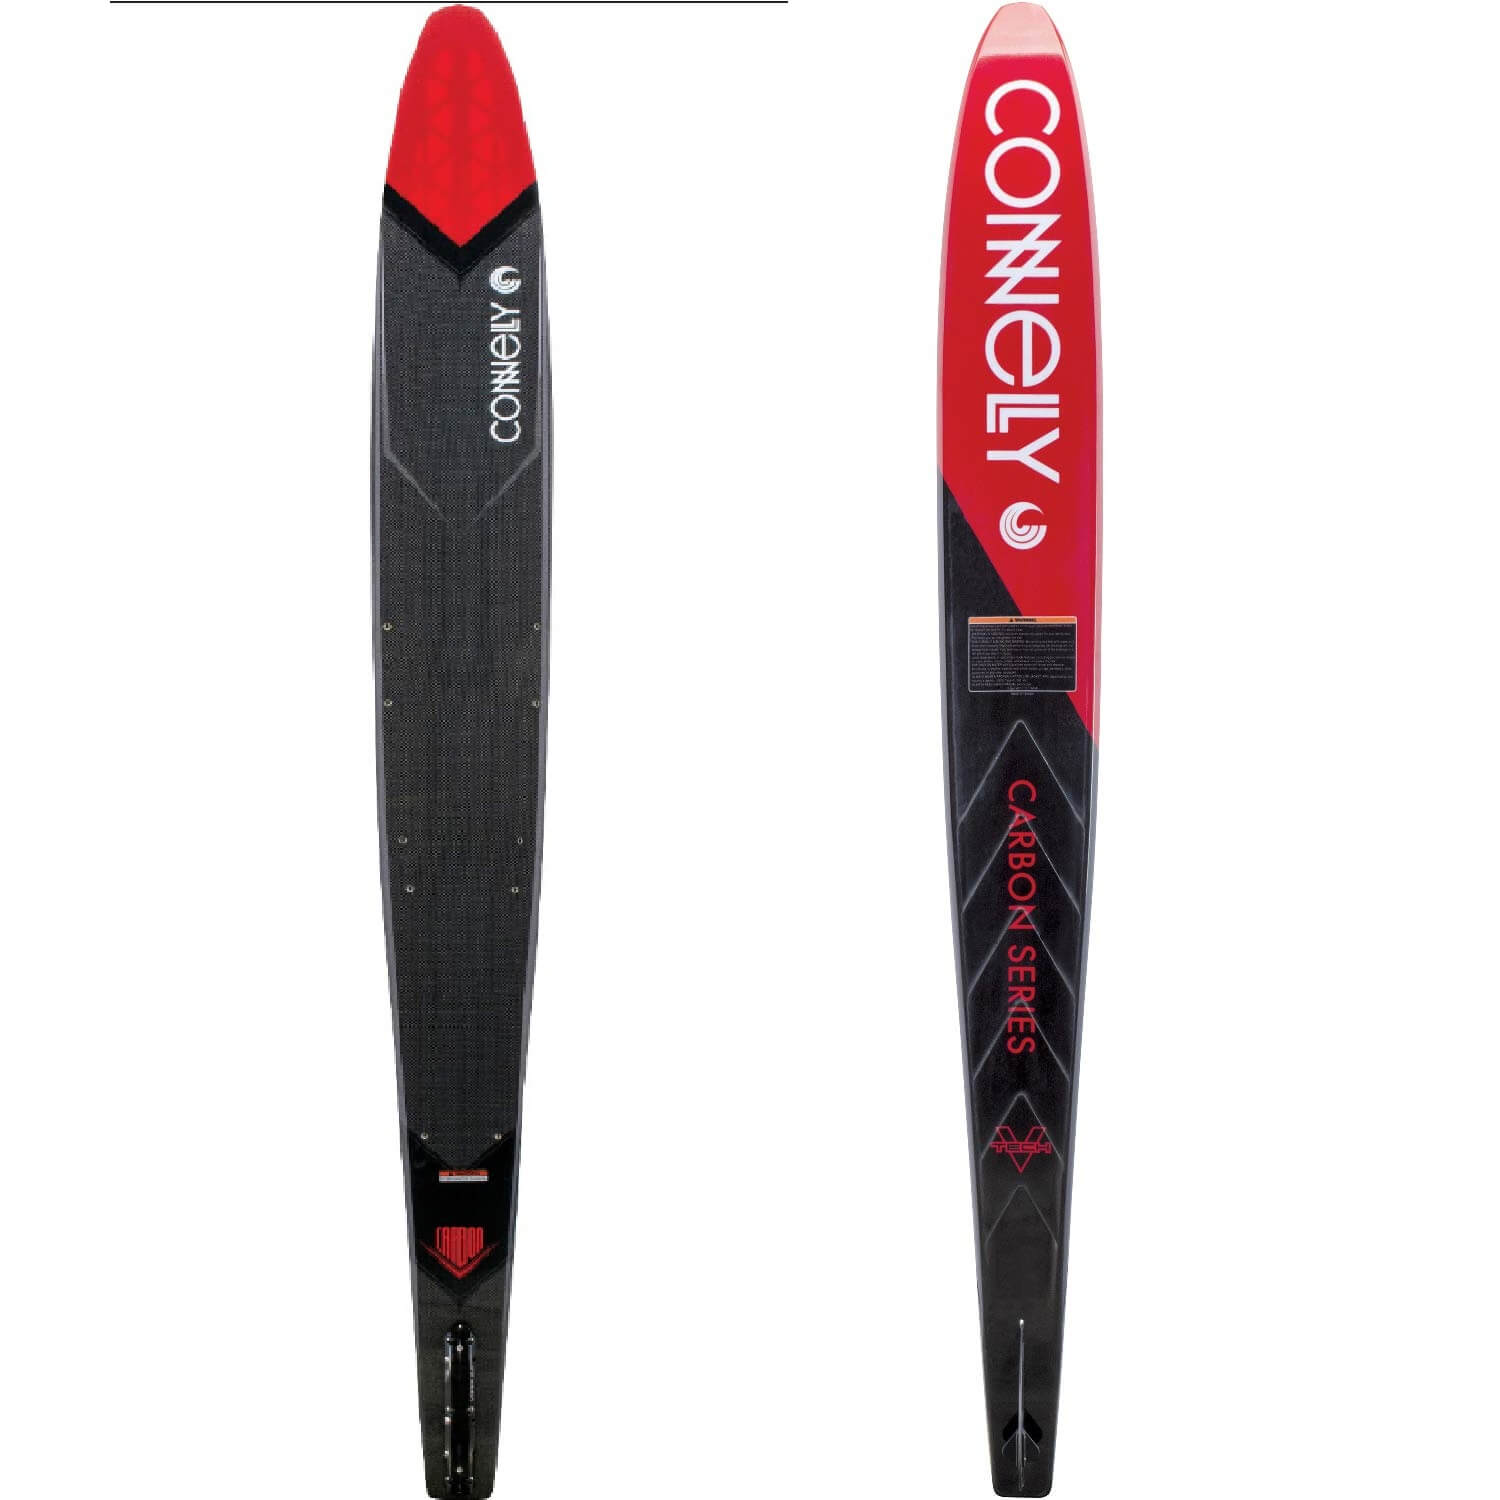 2. CONNELLY CARBON V SLALOM 67 INCH